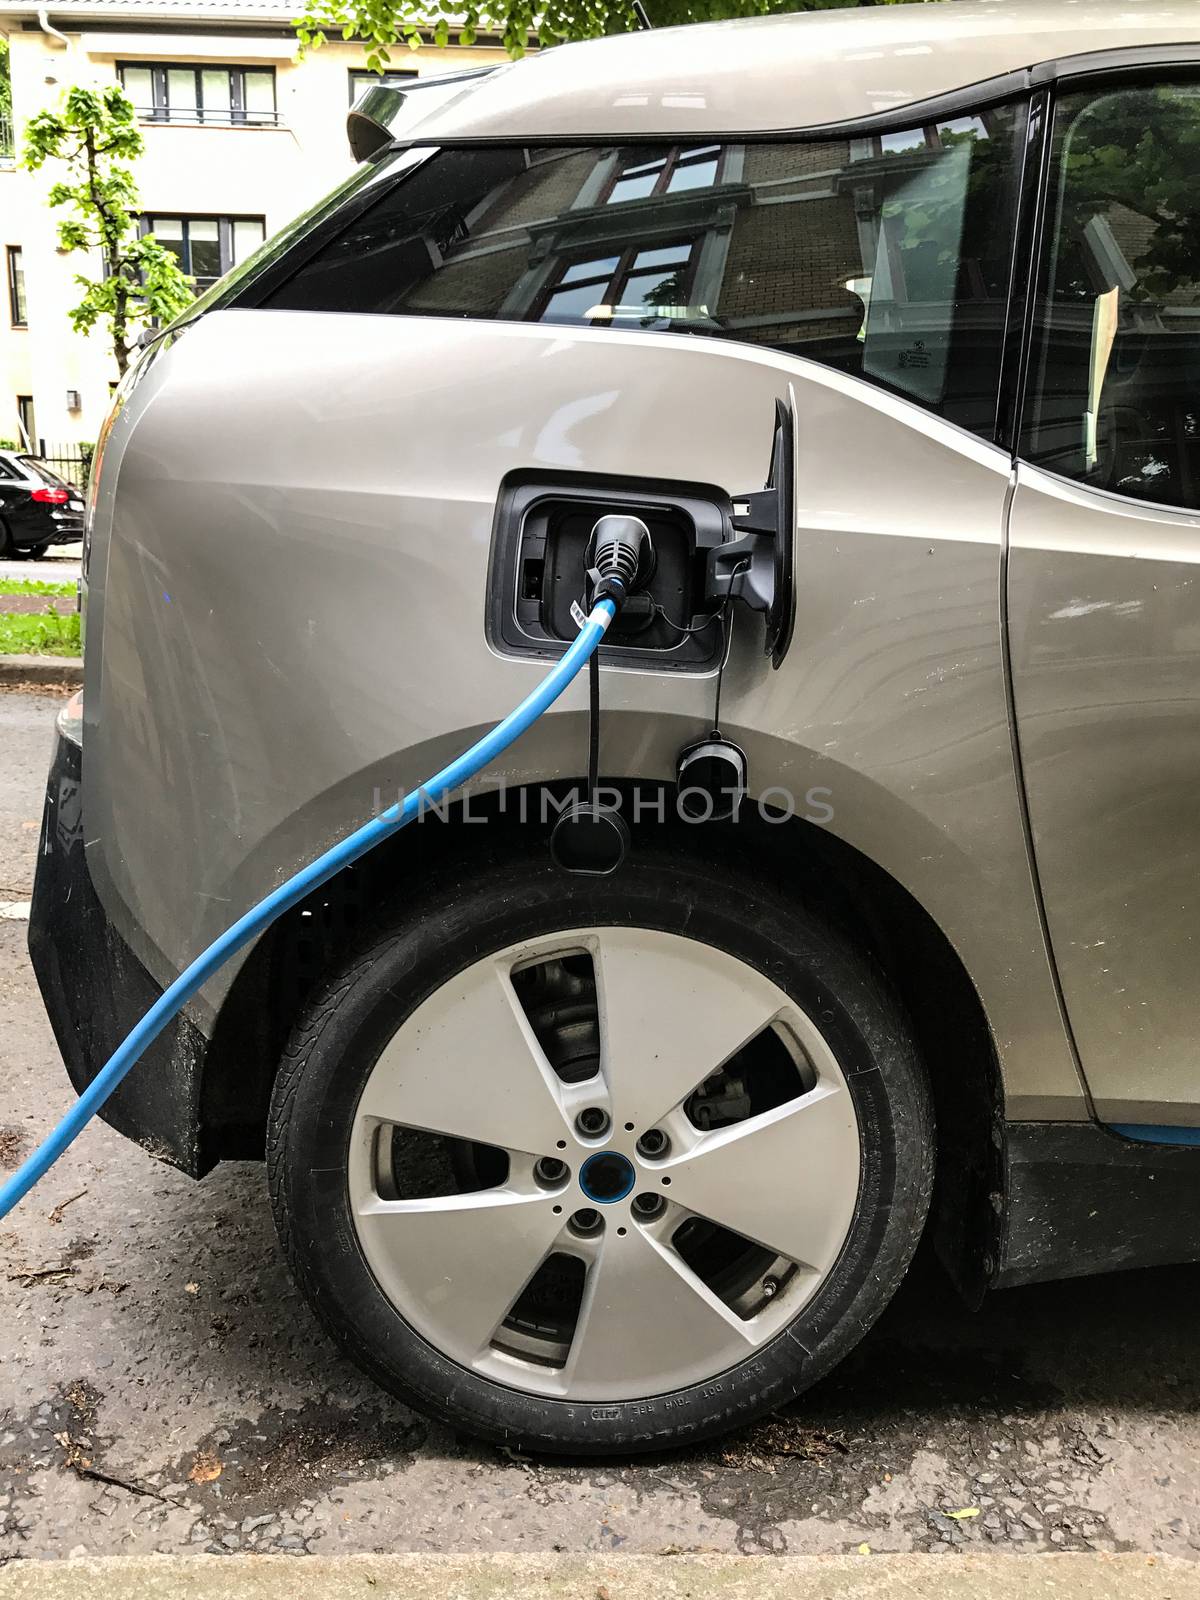 Electric car charging station in Oslo by Softulka